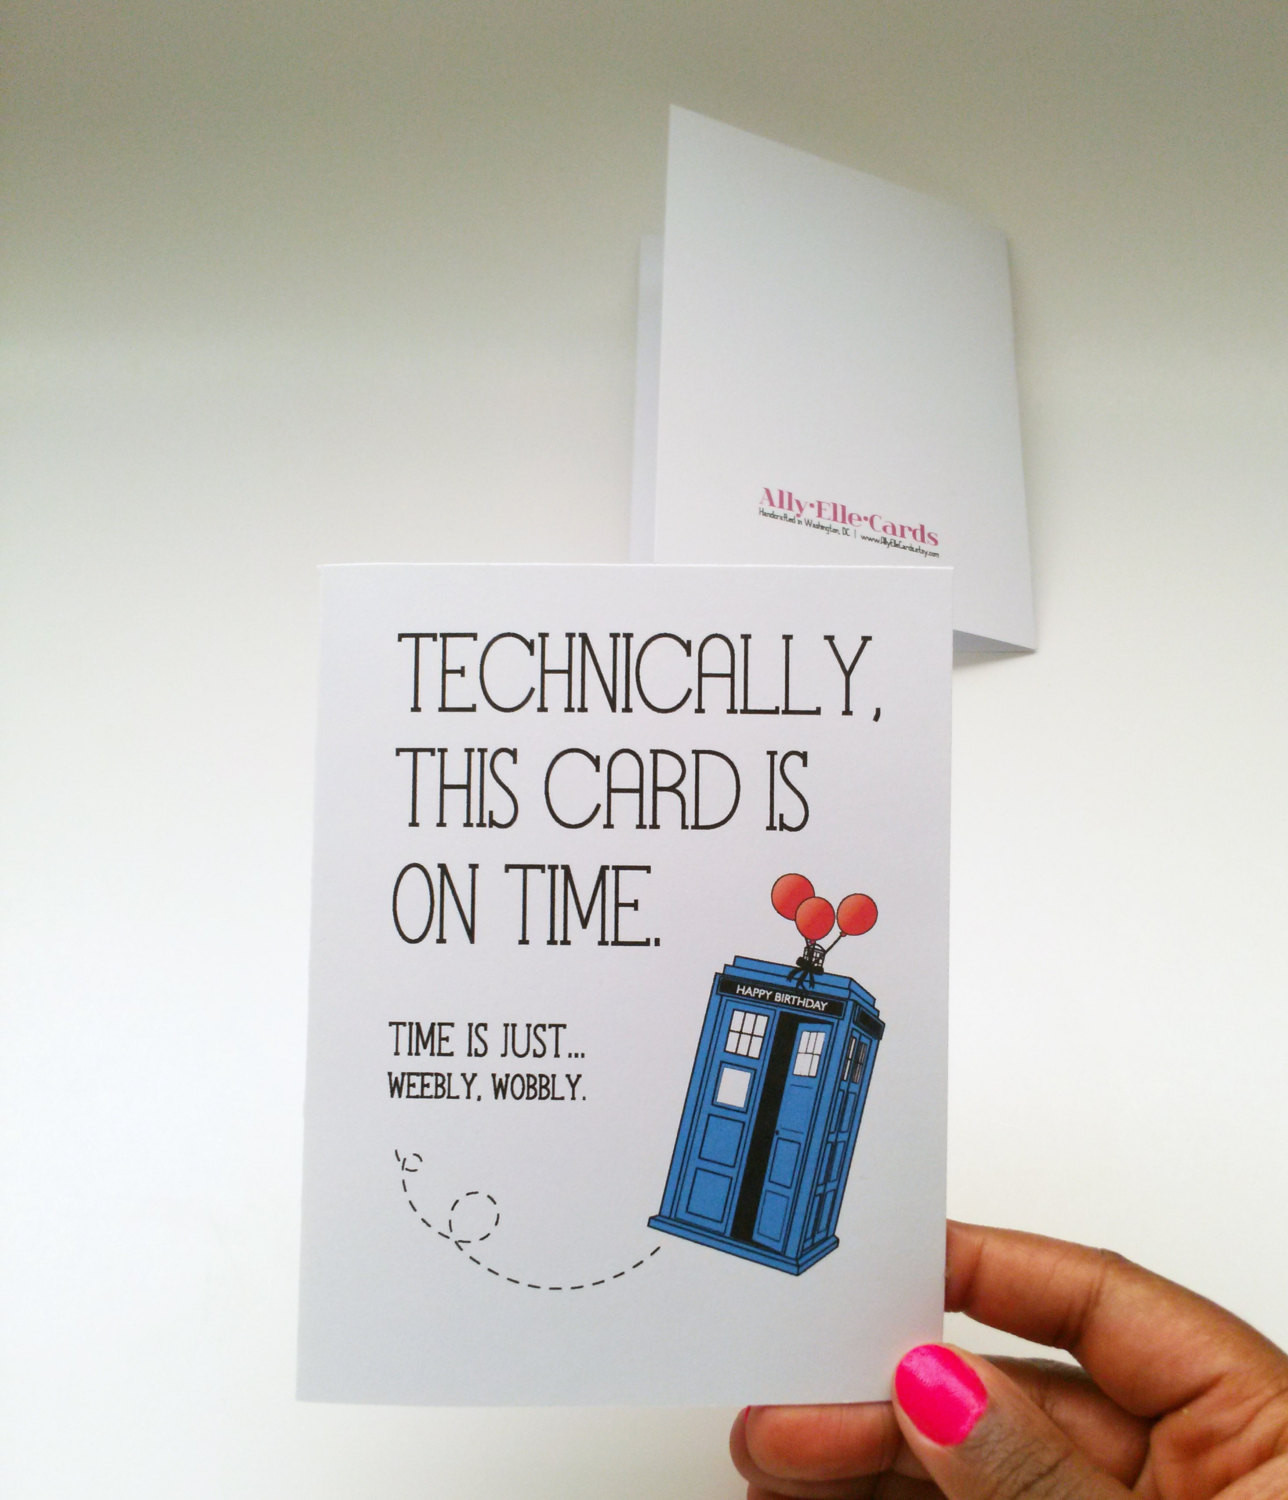 Late Birthday Card
 Doctor Who belated birthday card Technically this card is on